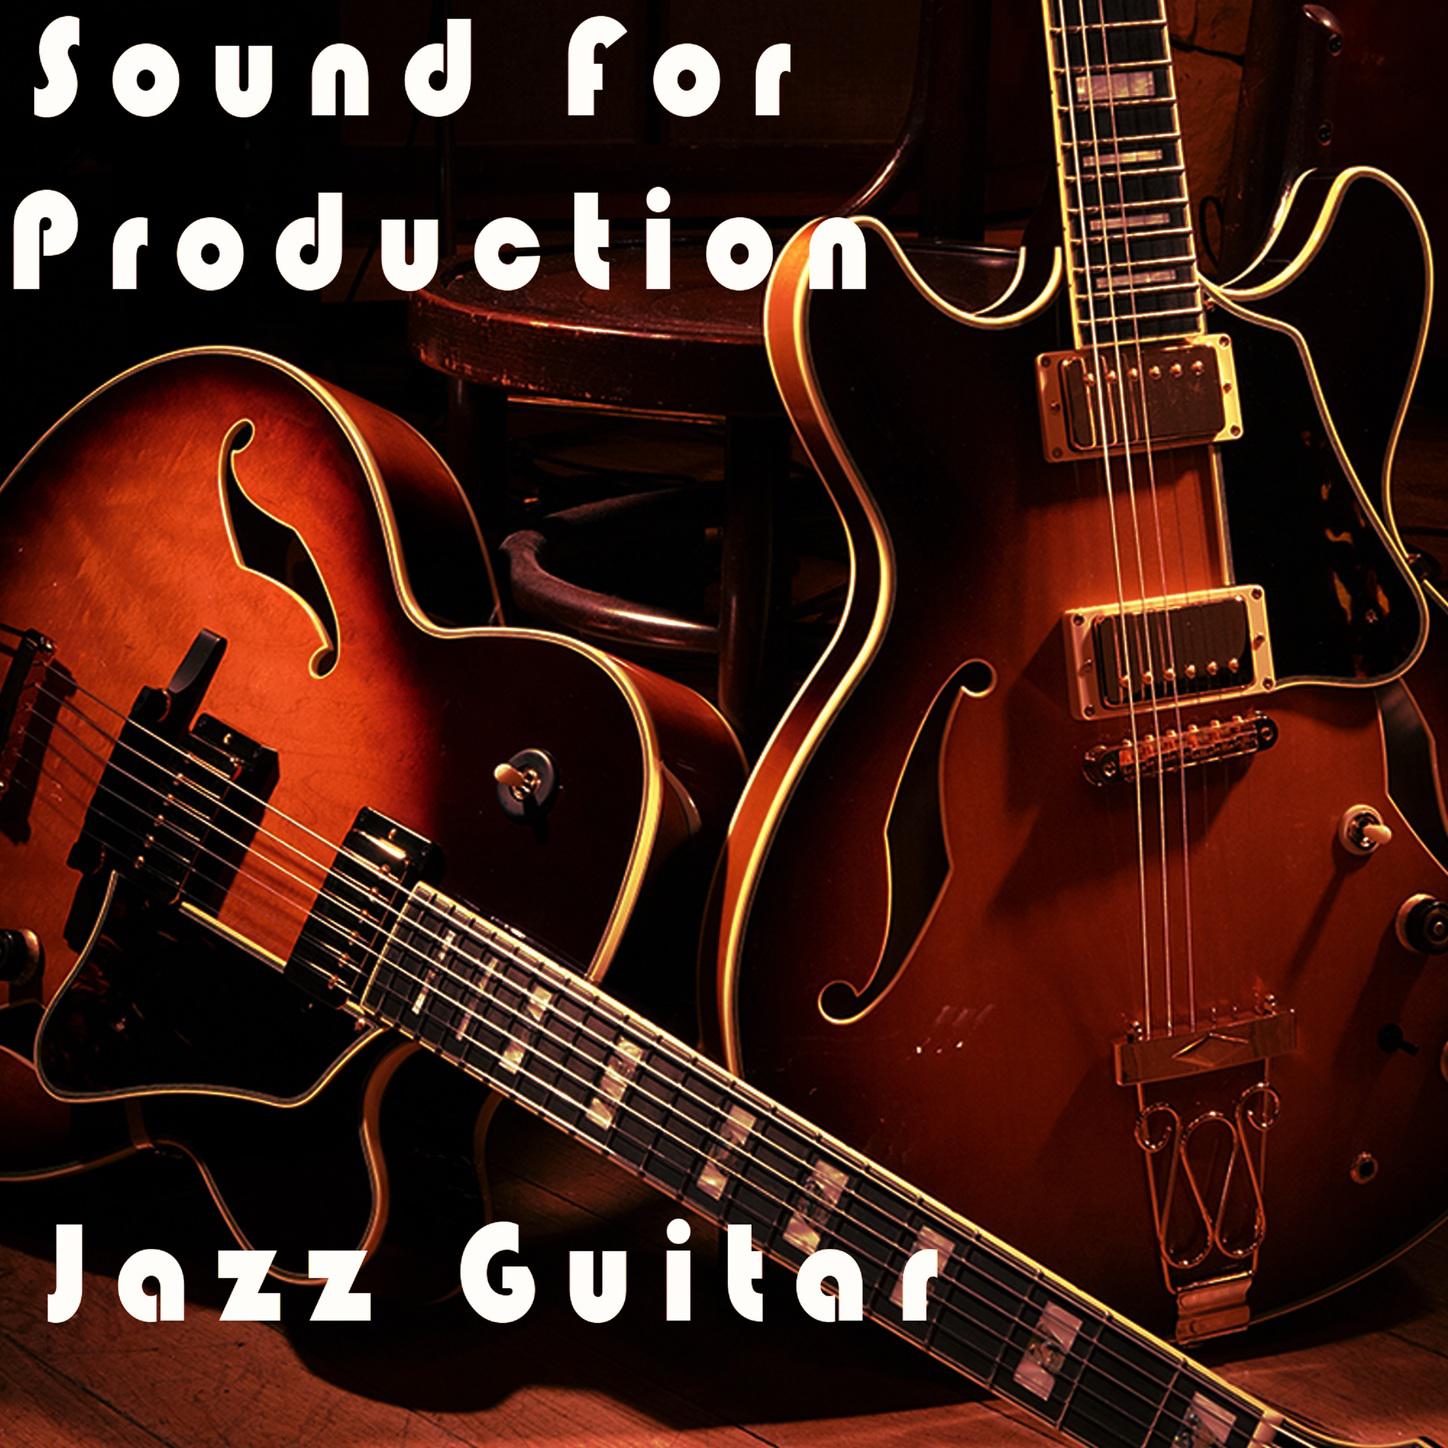 Sound For Production Jazz Guitar